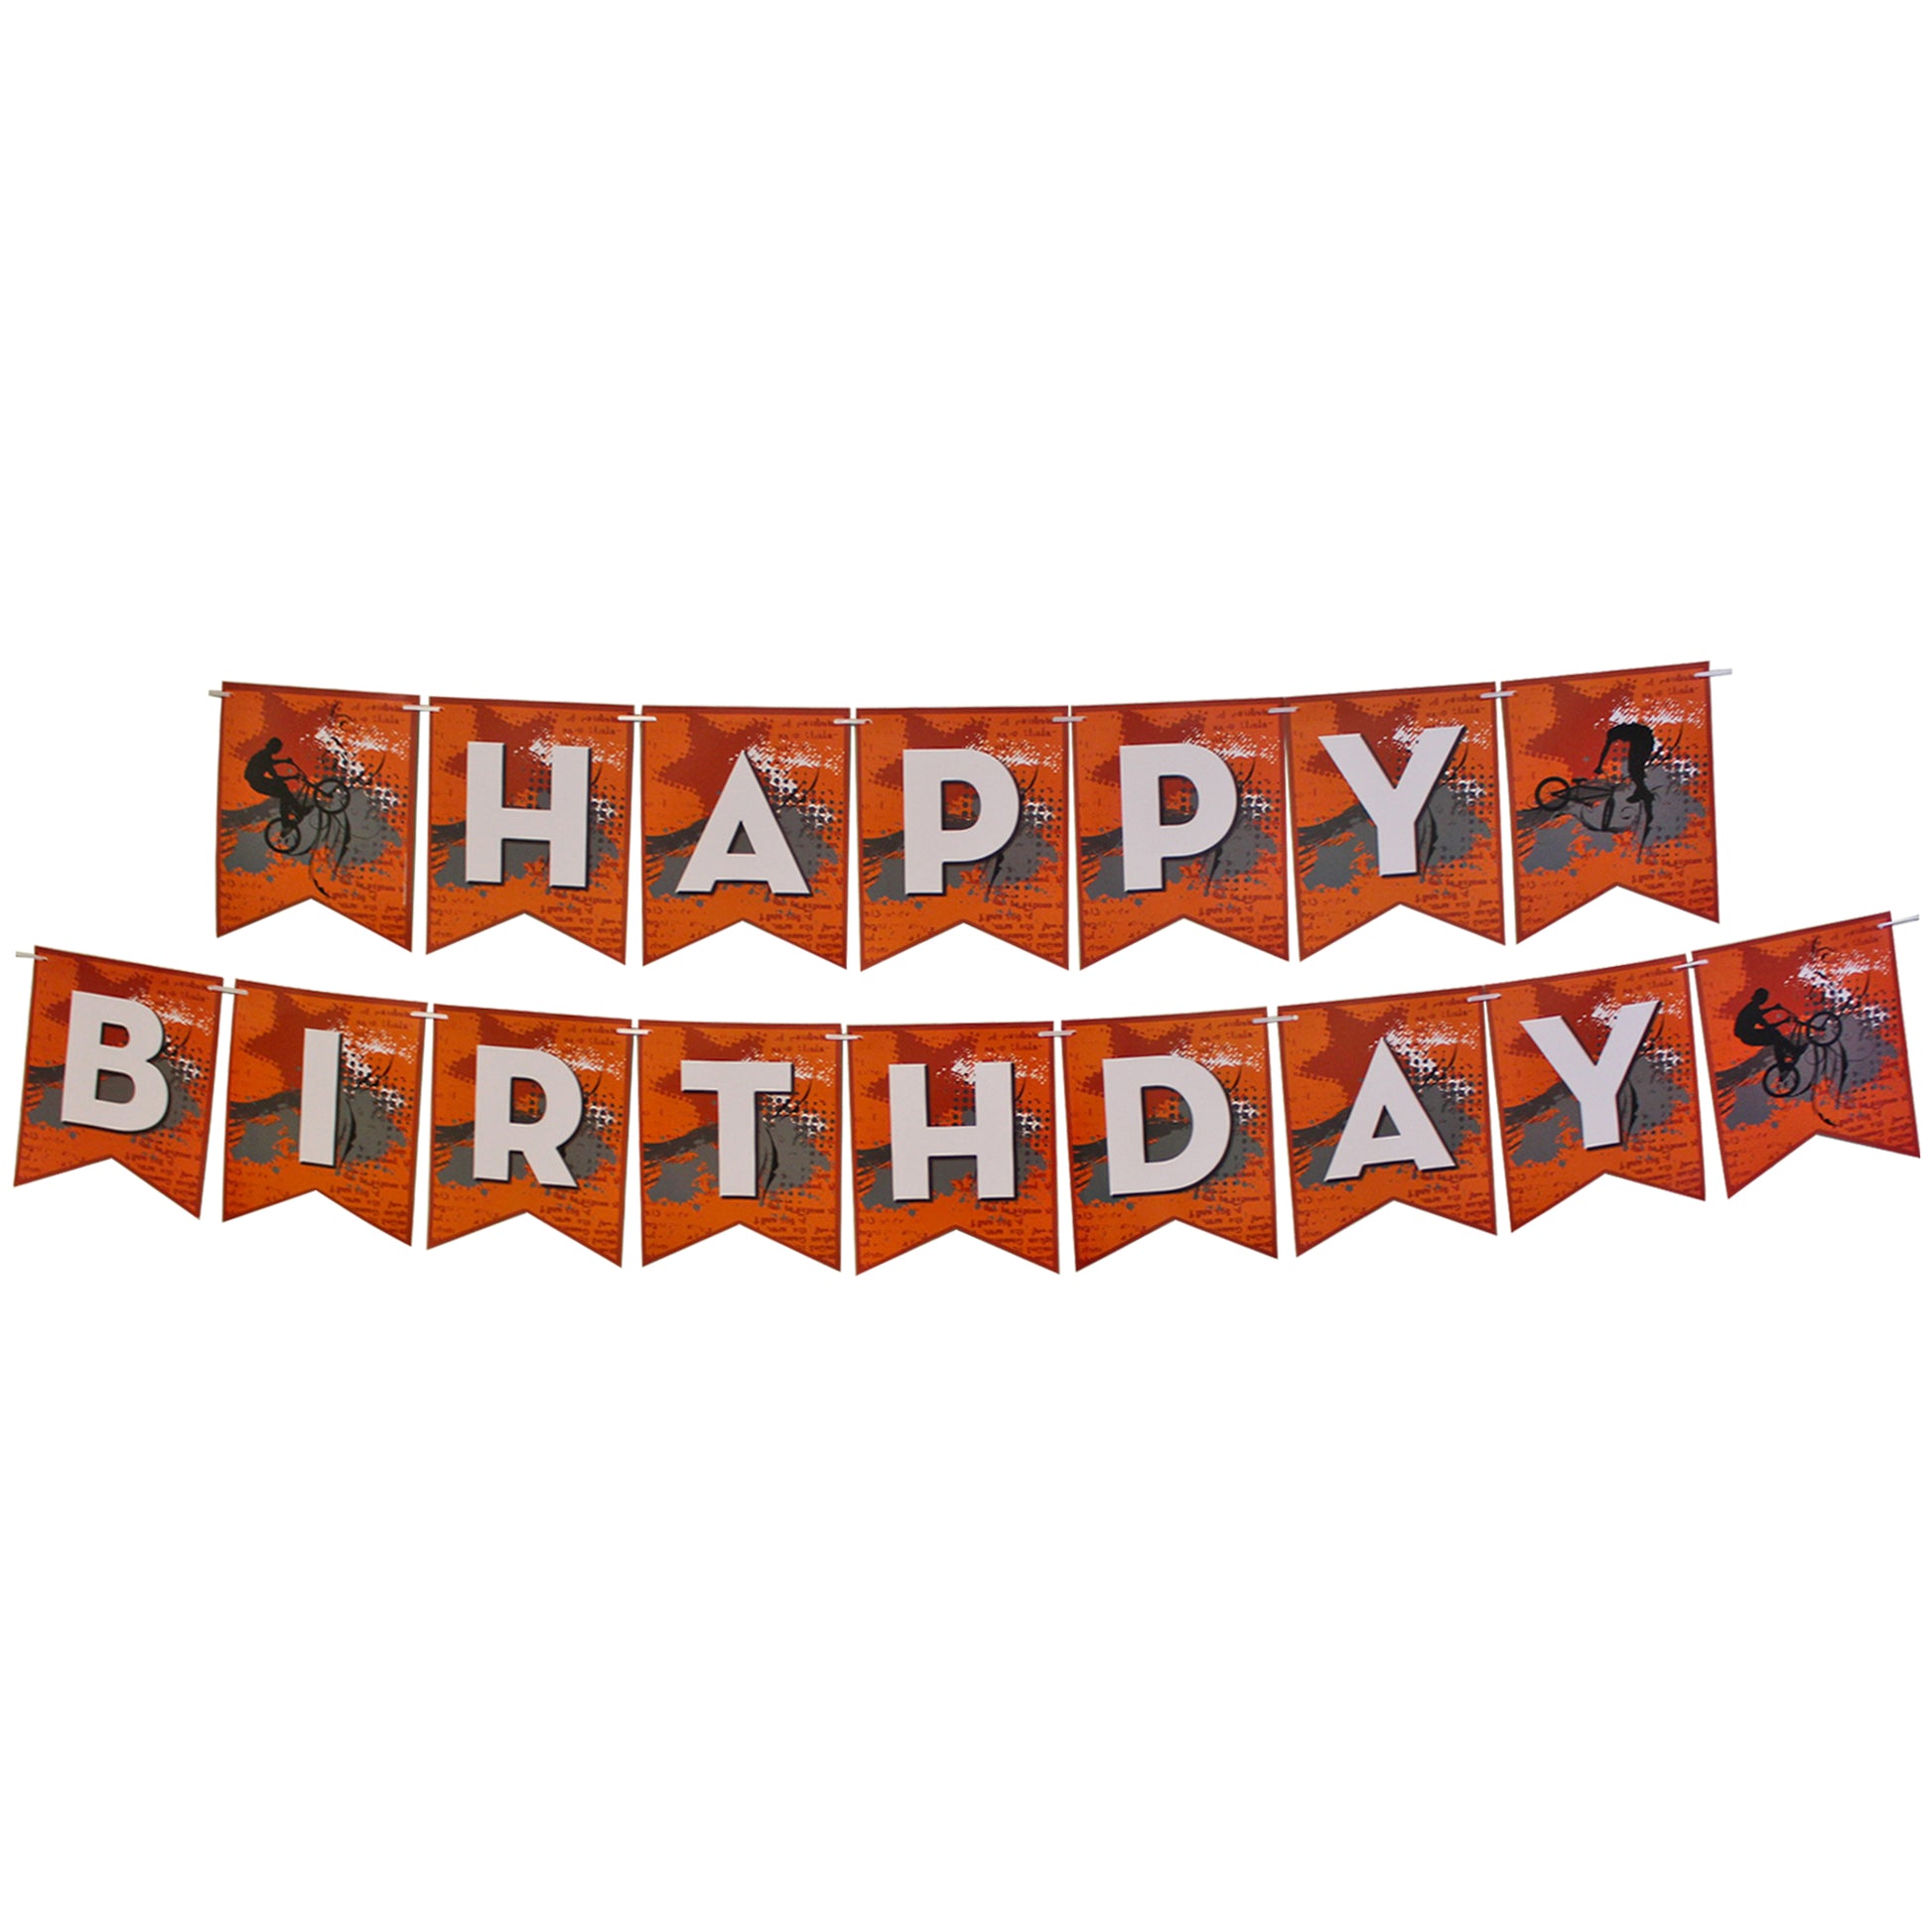 Image of the eXtreme Party Banner featuring an extreme party theme. The Happy Birthday Banner is 6 inches x 8 inches, making them the perfect addition to your birthday party celebration with an adventurous, outdoor or extreme sports theme.